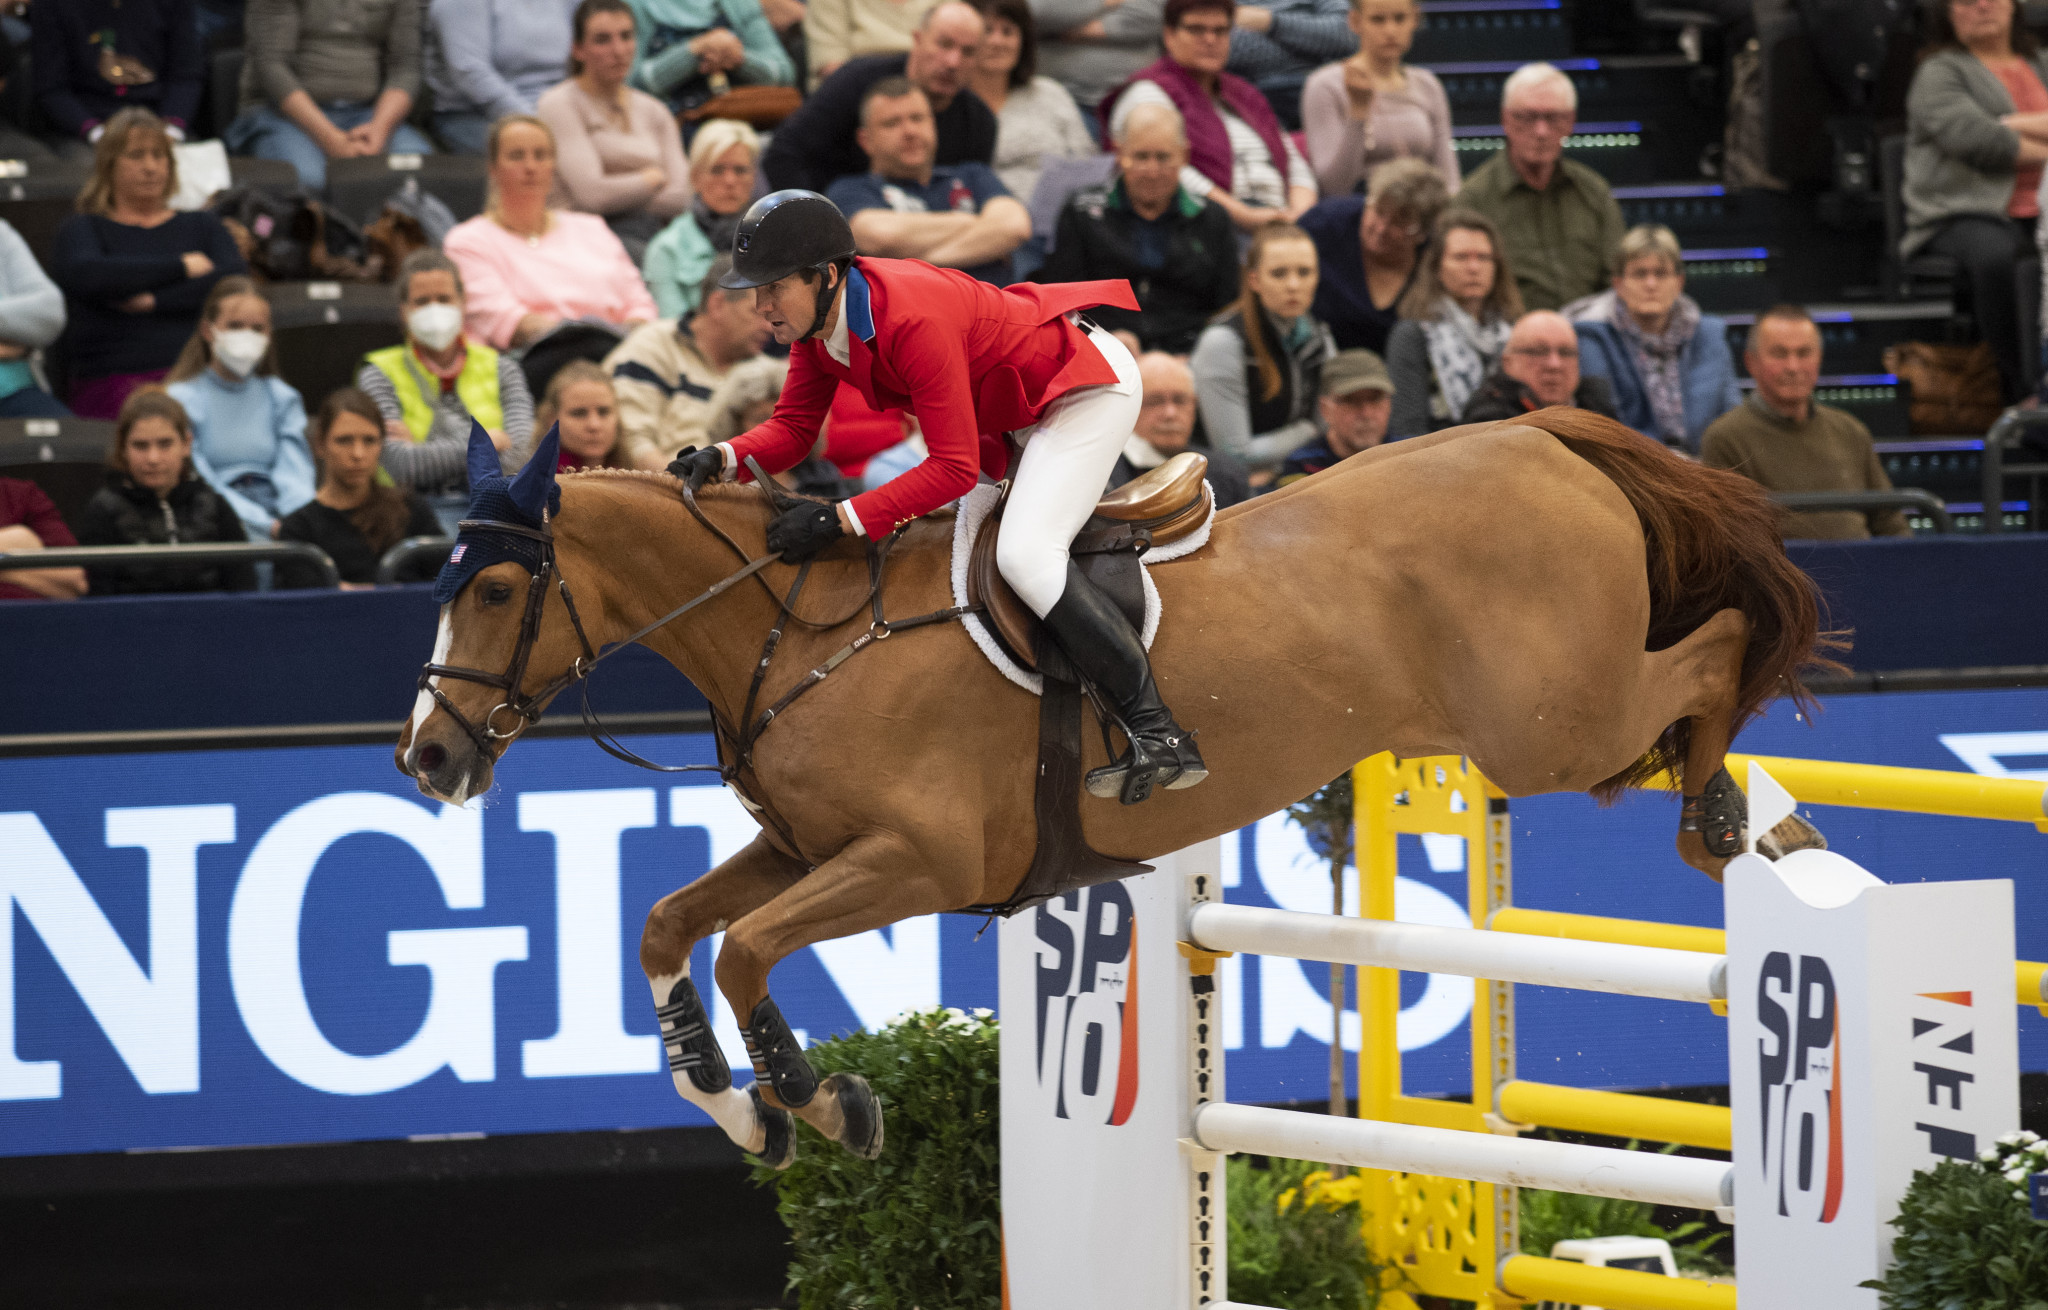 McLain Ward surged to an impressive victory in day two of the FEI Jumping World Cup Final ©FEI